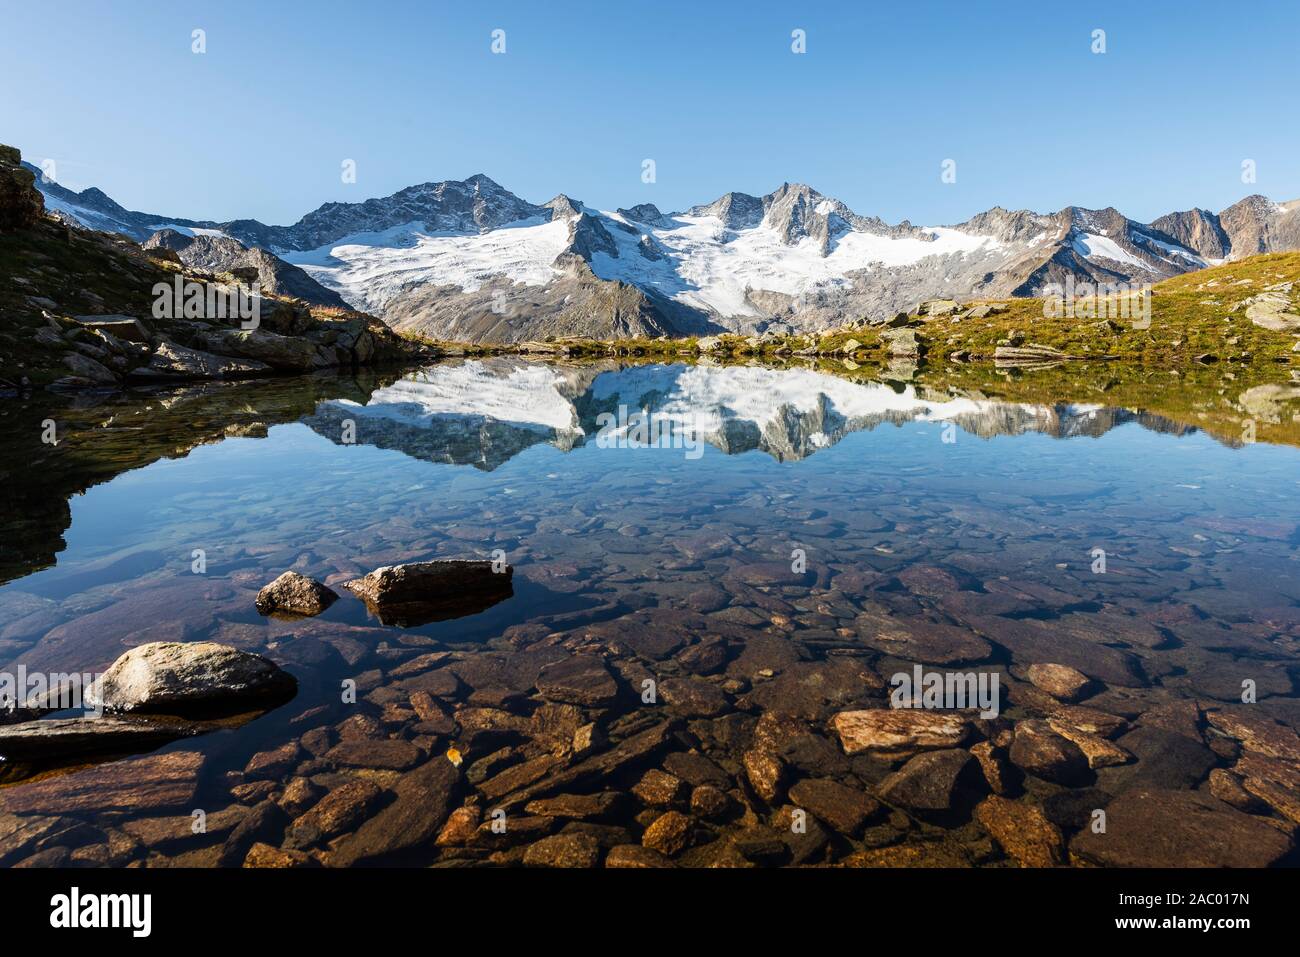 Mountains Turnerkamp, Großer Möseler, Steinmandl, Waxeggkees glacier  and Hornkees glacier are reflected in a mountain lake, Zillertal, Tyrol, Austria Stock Photo